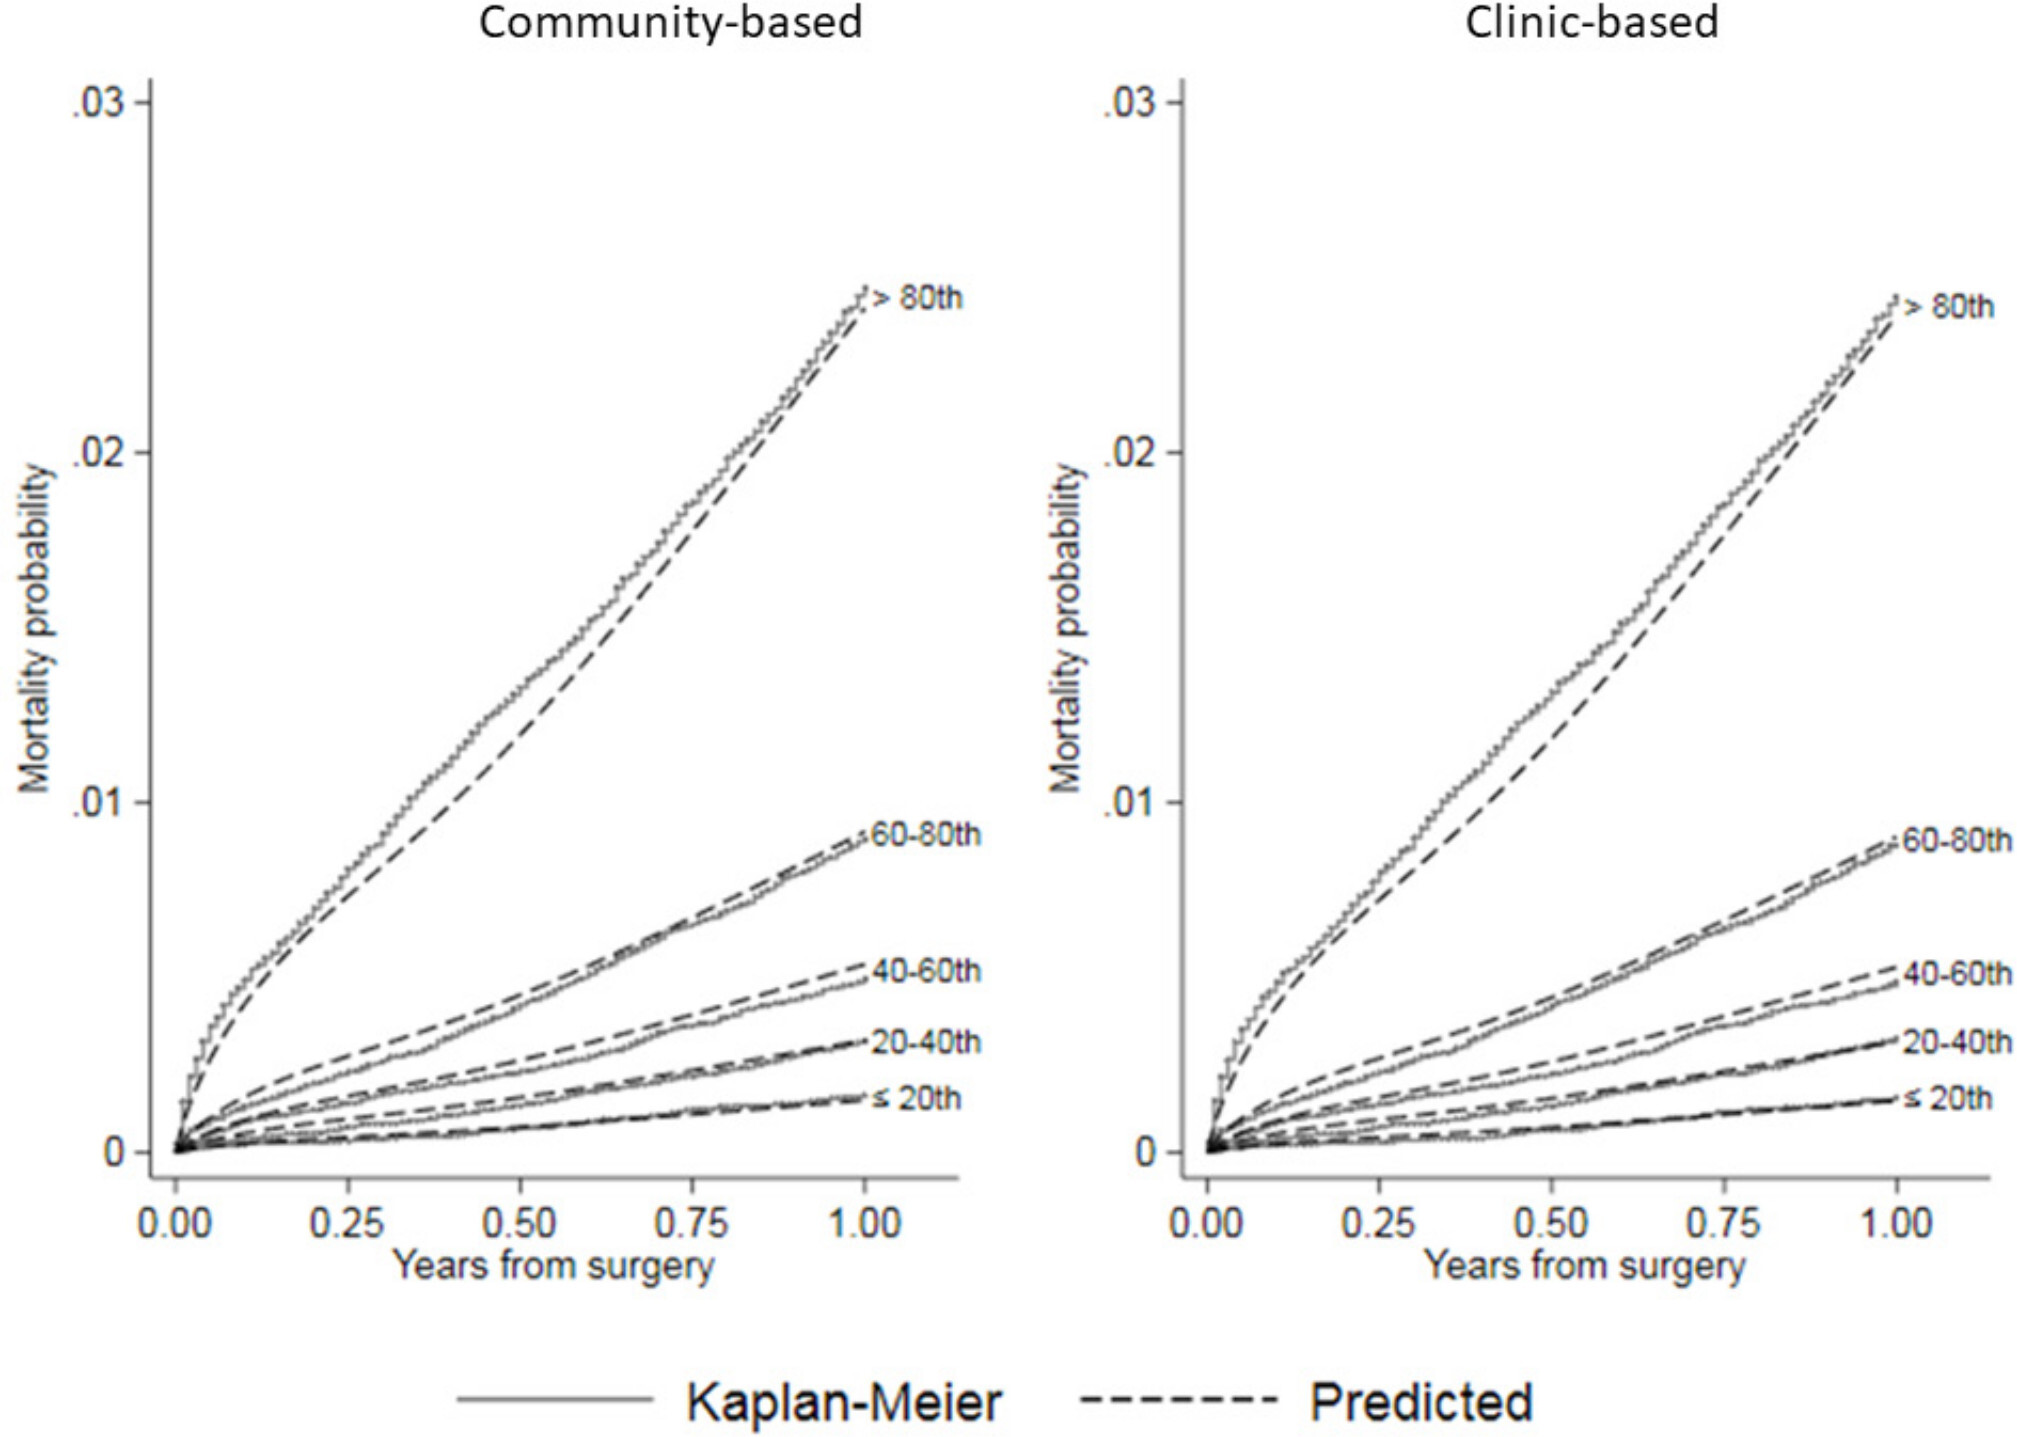 Fig. 5 
            Calibration plots comparing predicted mortality by risk quintile from community-based and clinic-based flexible parametric survival regression (FPR) models to Kaplan-Meier estimates of observed mortality after knee arthroplasty in the National Joint Registry for England and Wales (NJR).
          